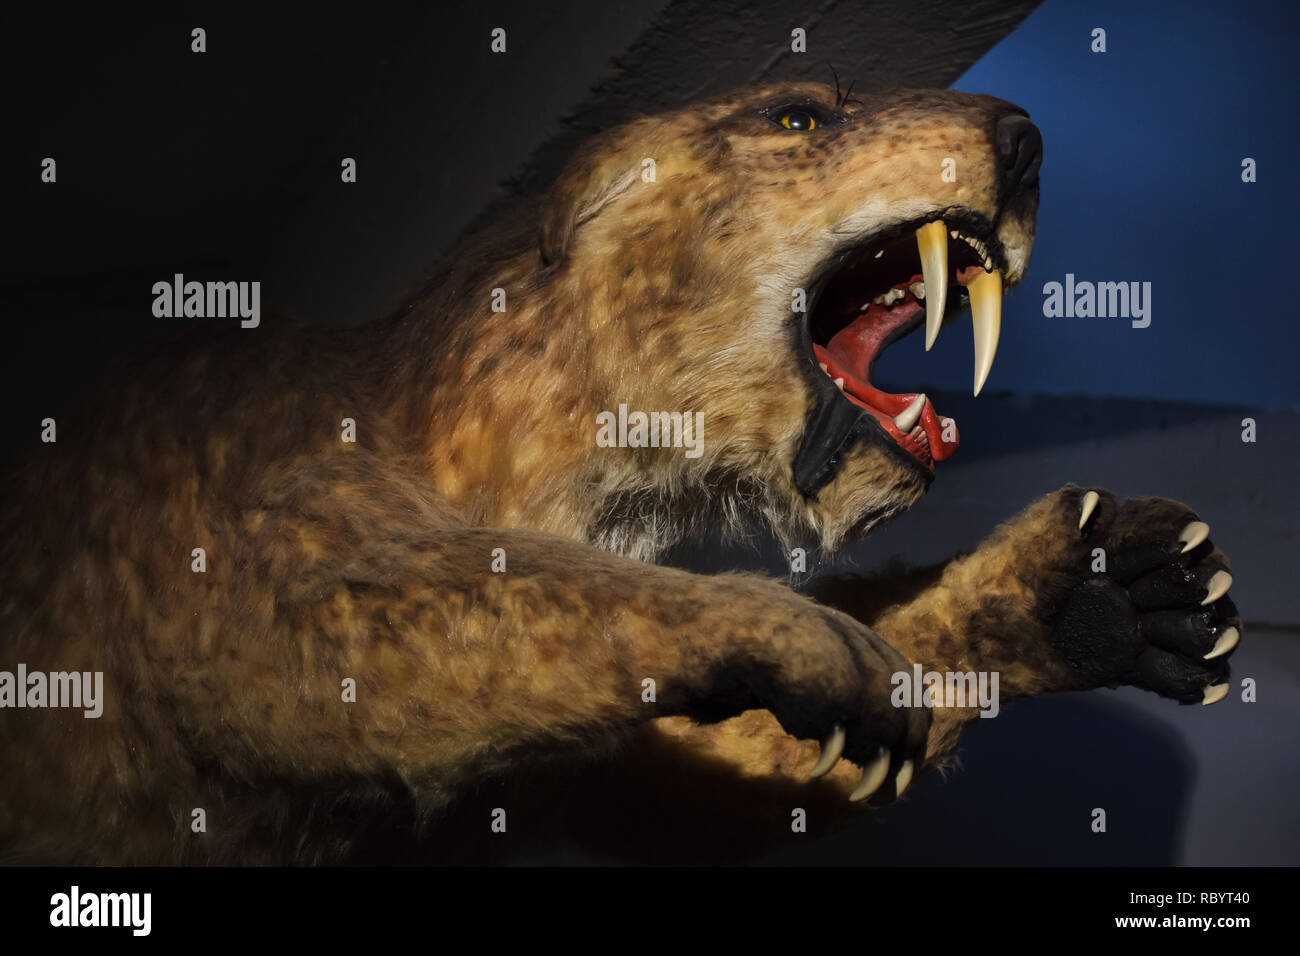 Saber-toothed tiger (Smilodon populator) displayed as a life size model. Stock Photo